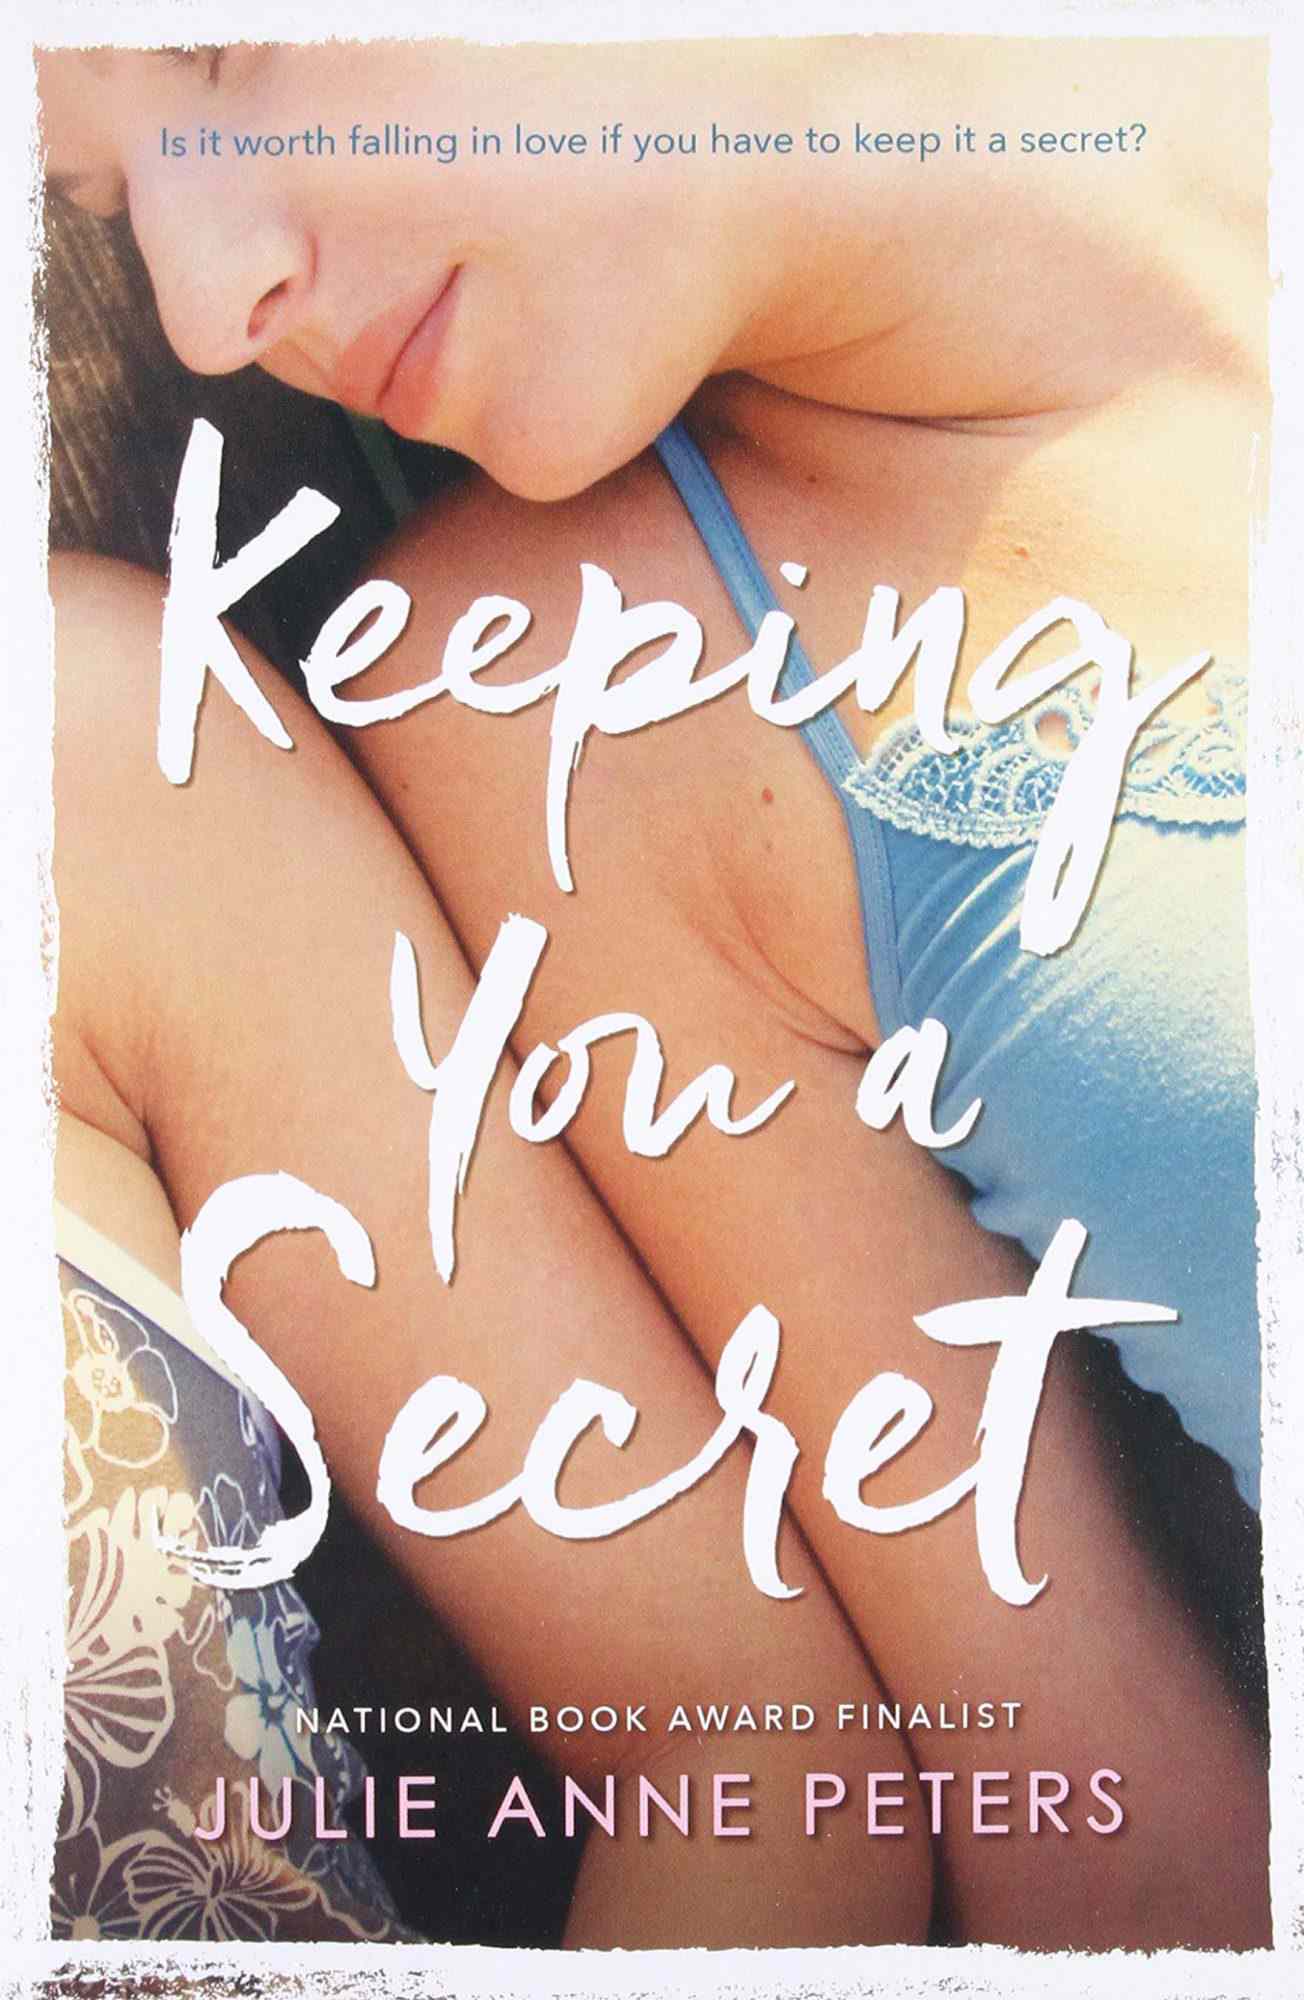 Keeping You a Secret by Julie Anne Peters